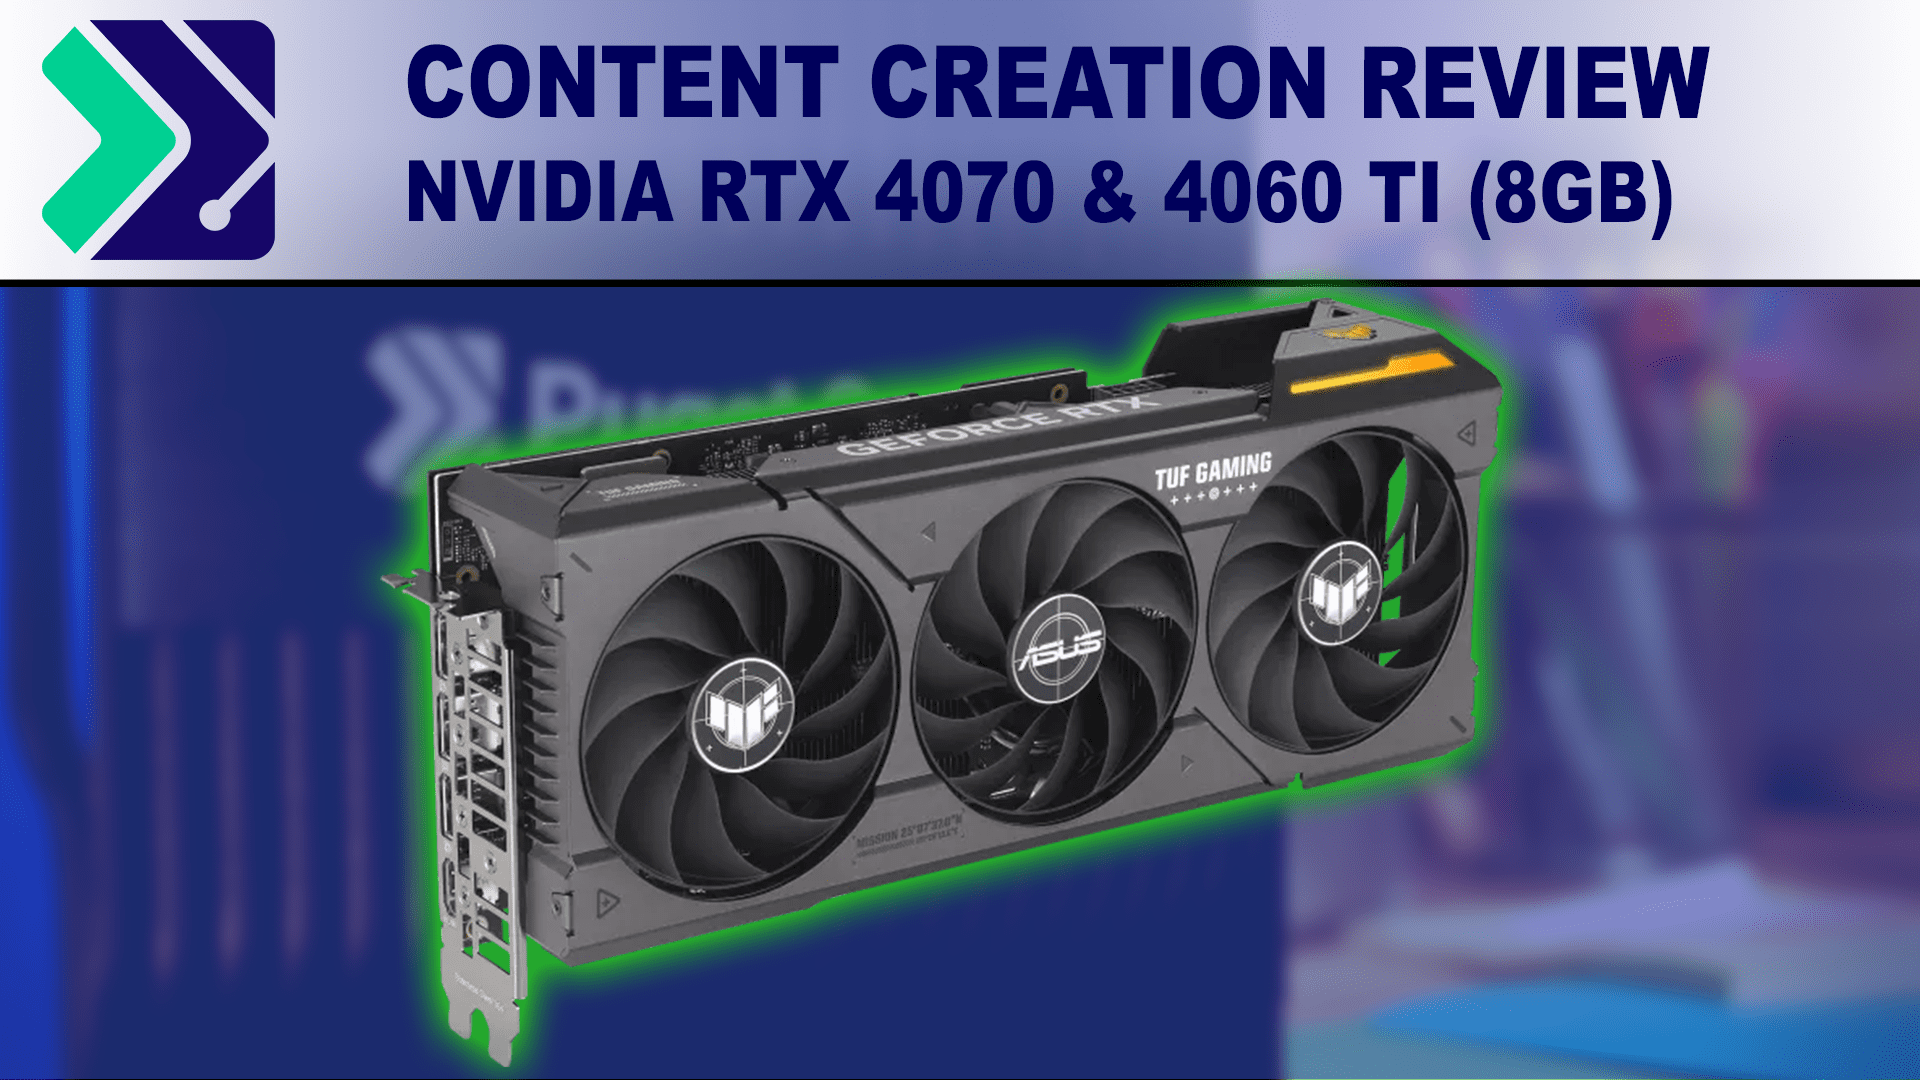 RTX 4070 4060 Ti 8GB Content Creation Review